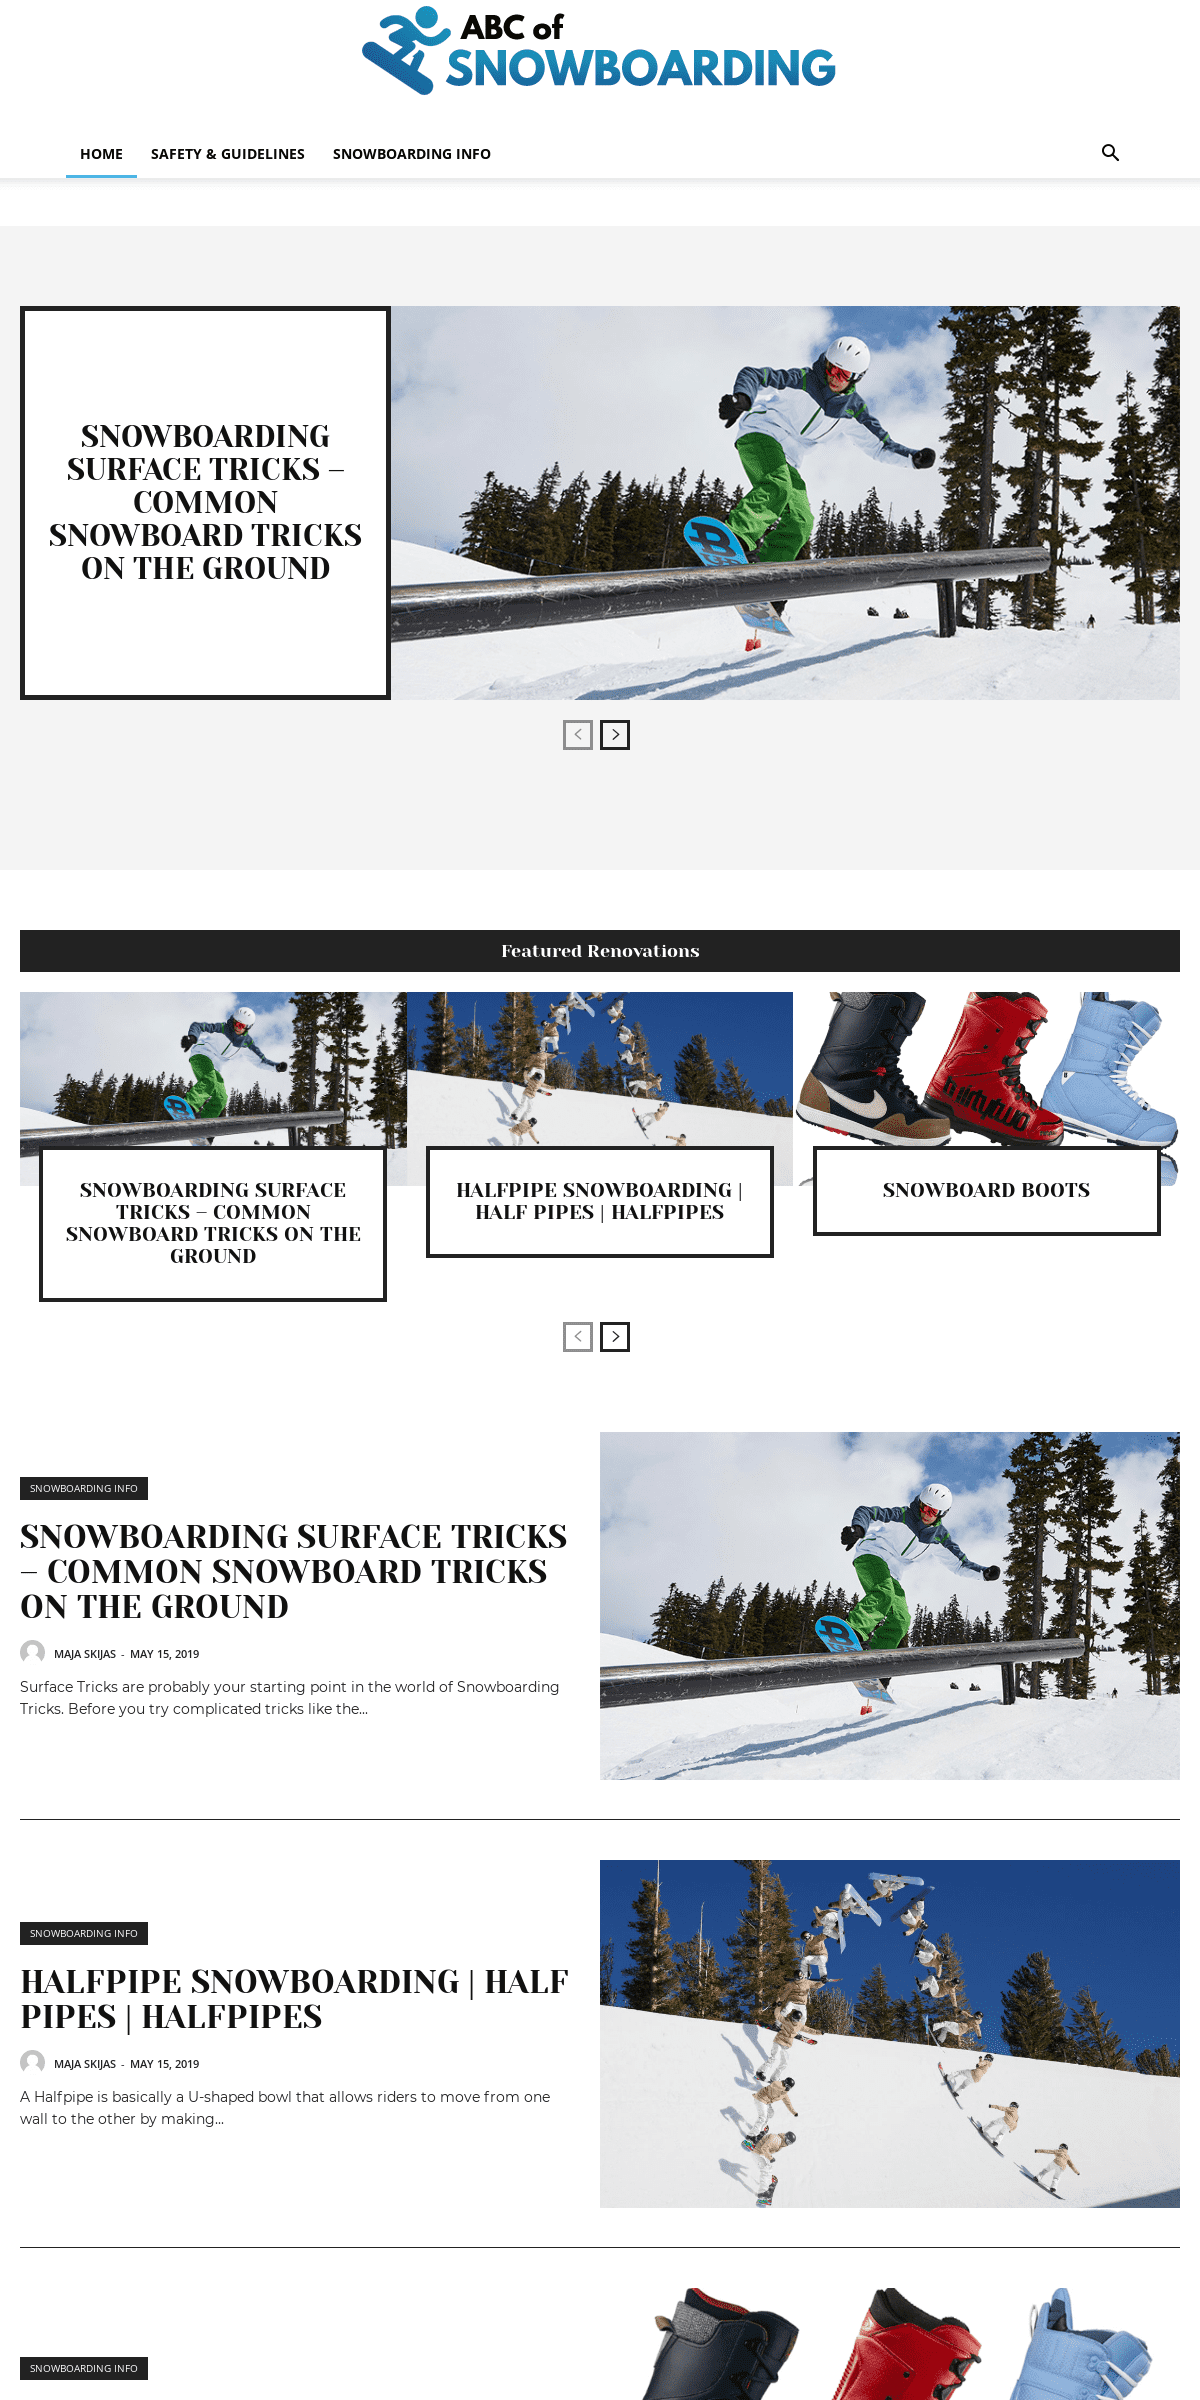 A complete backup of abc-of-snowboarding.com